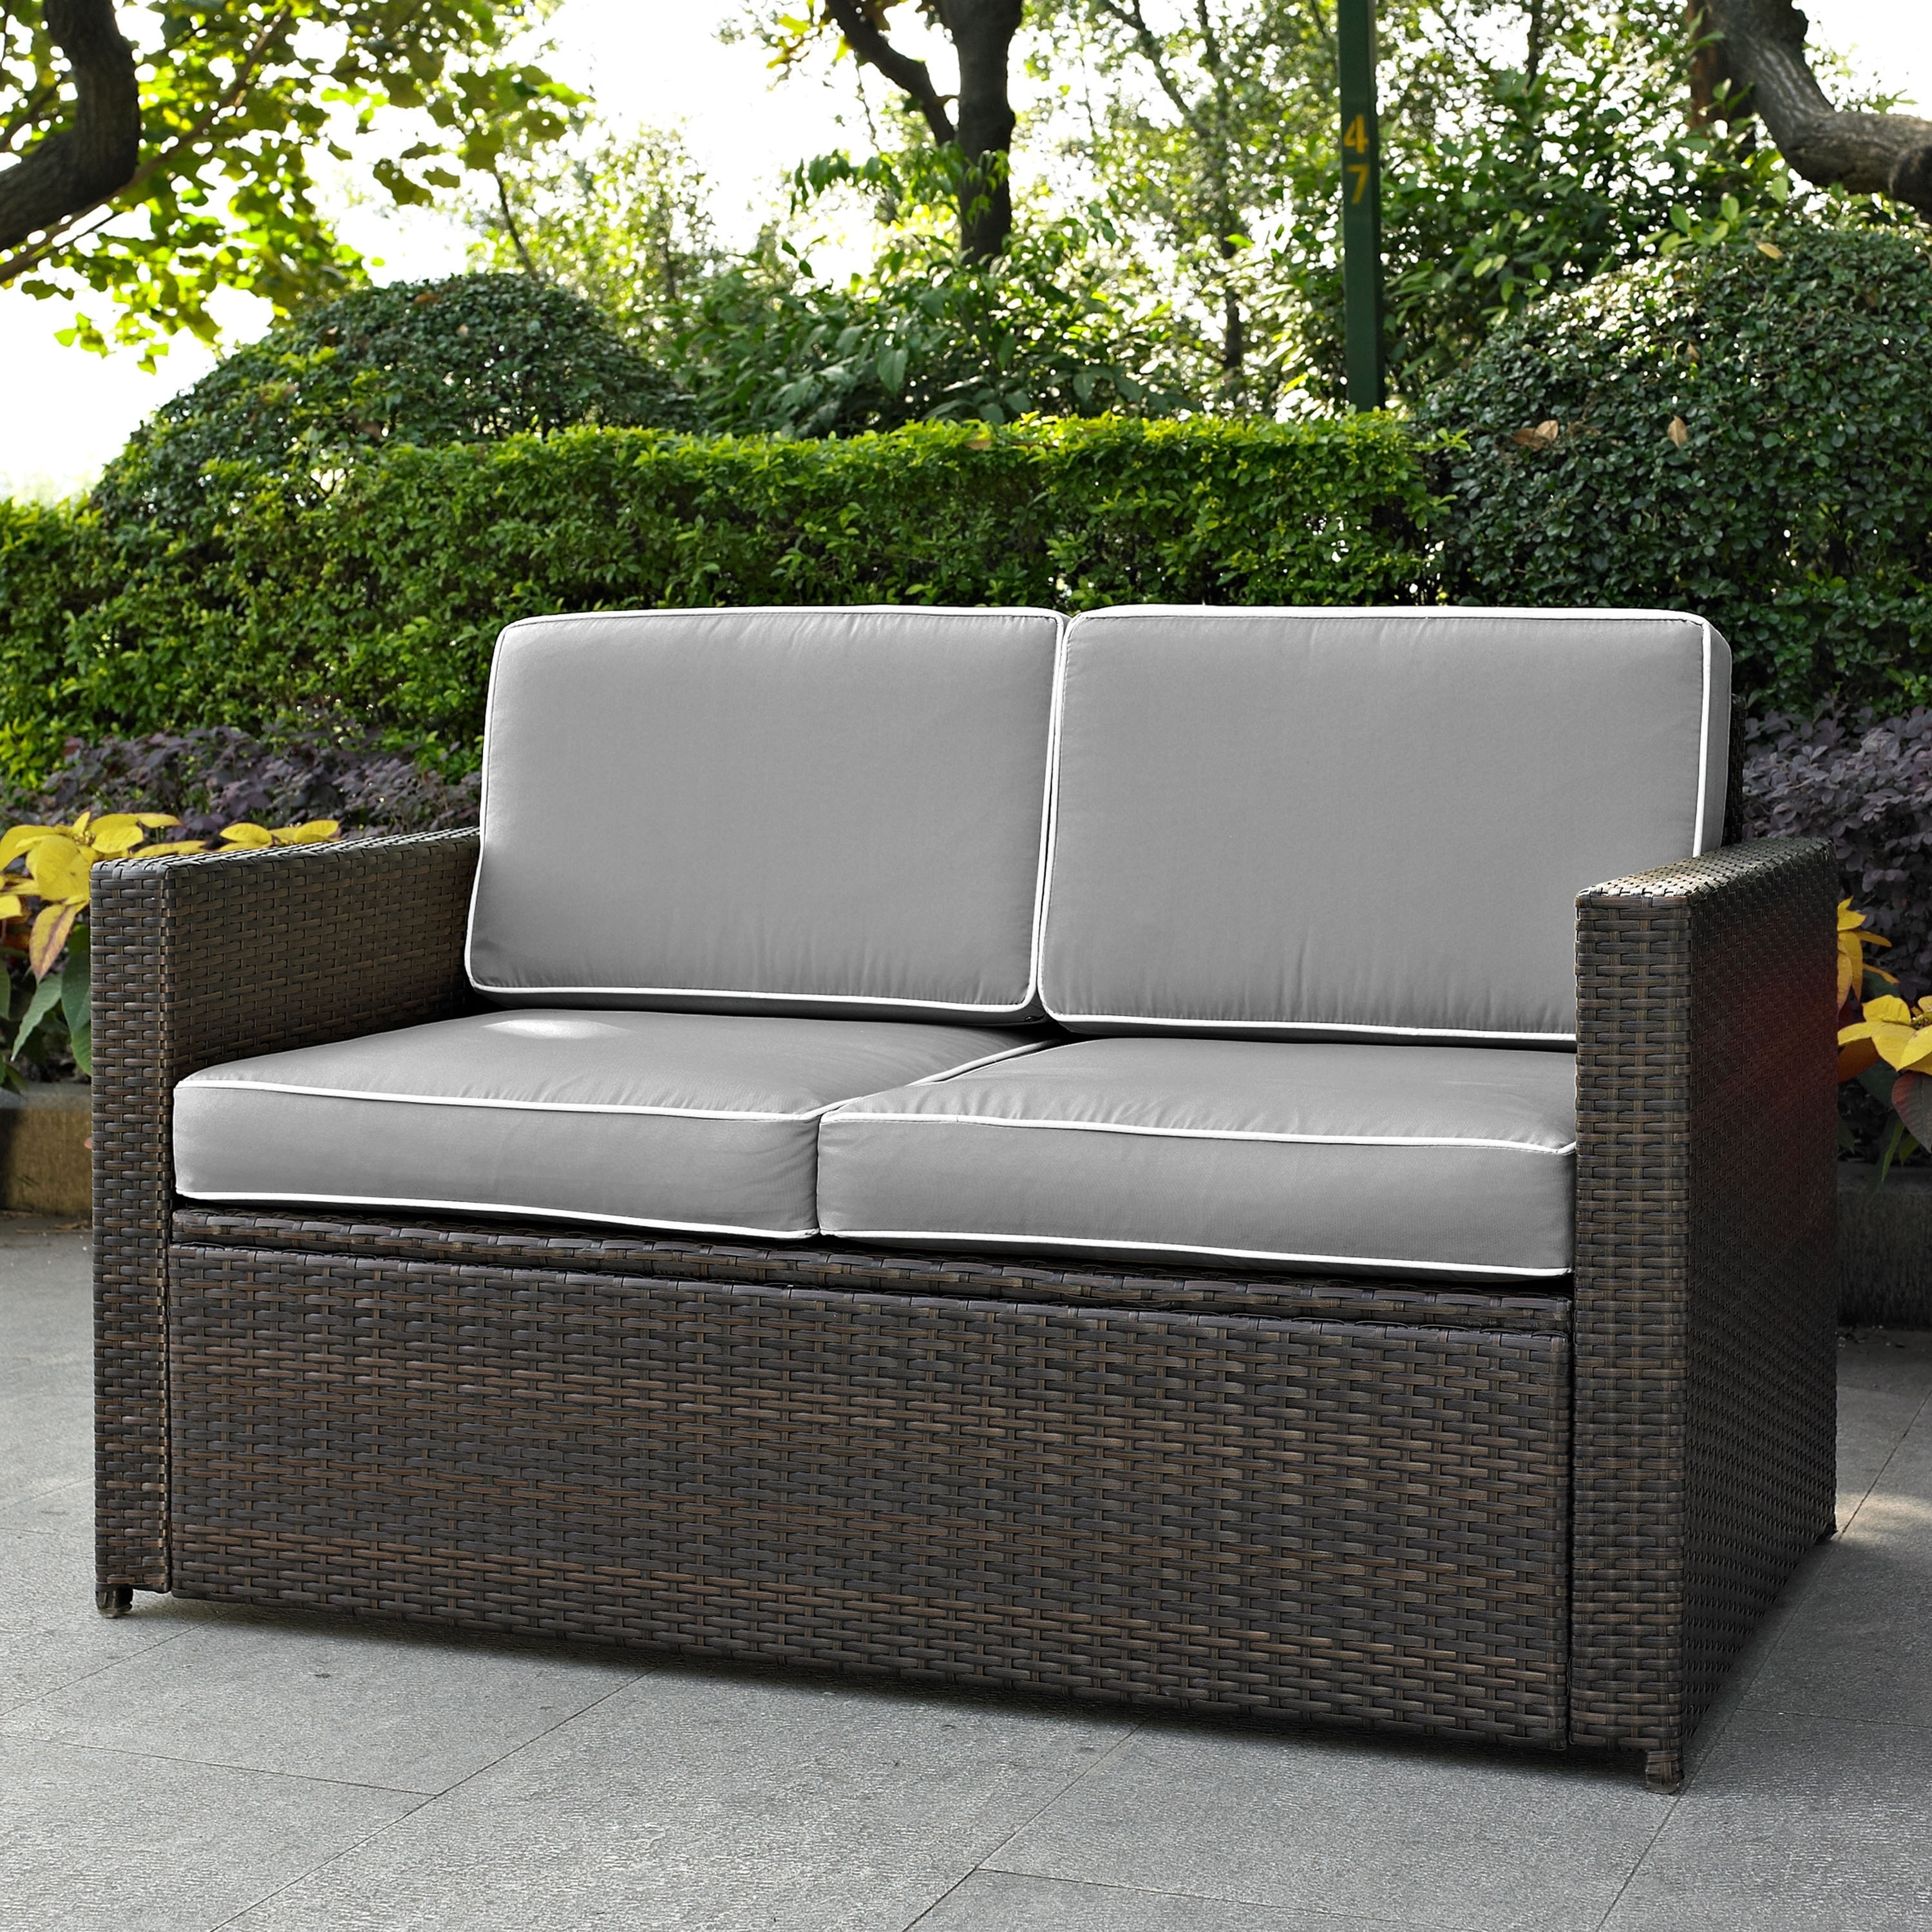 Palm Harbor Outdoor Wicker Loveseat In Brown With Grey Cushions